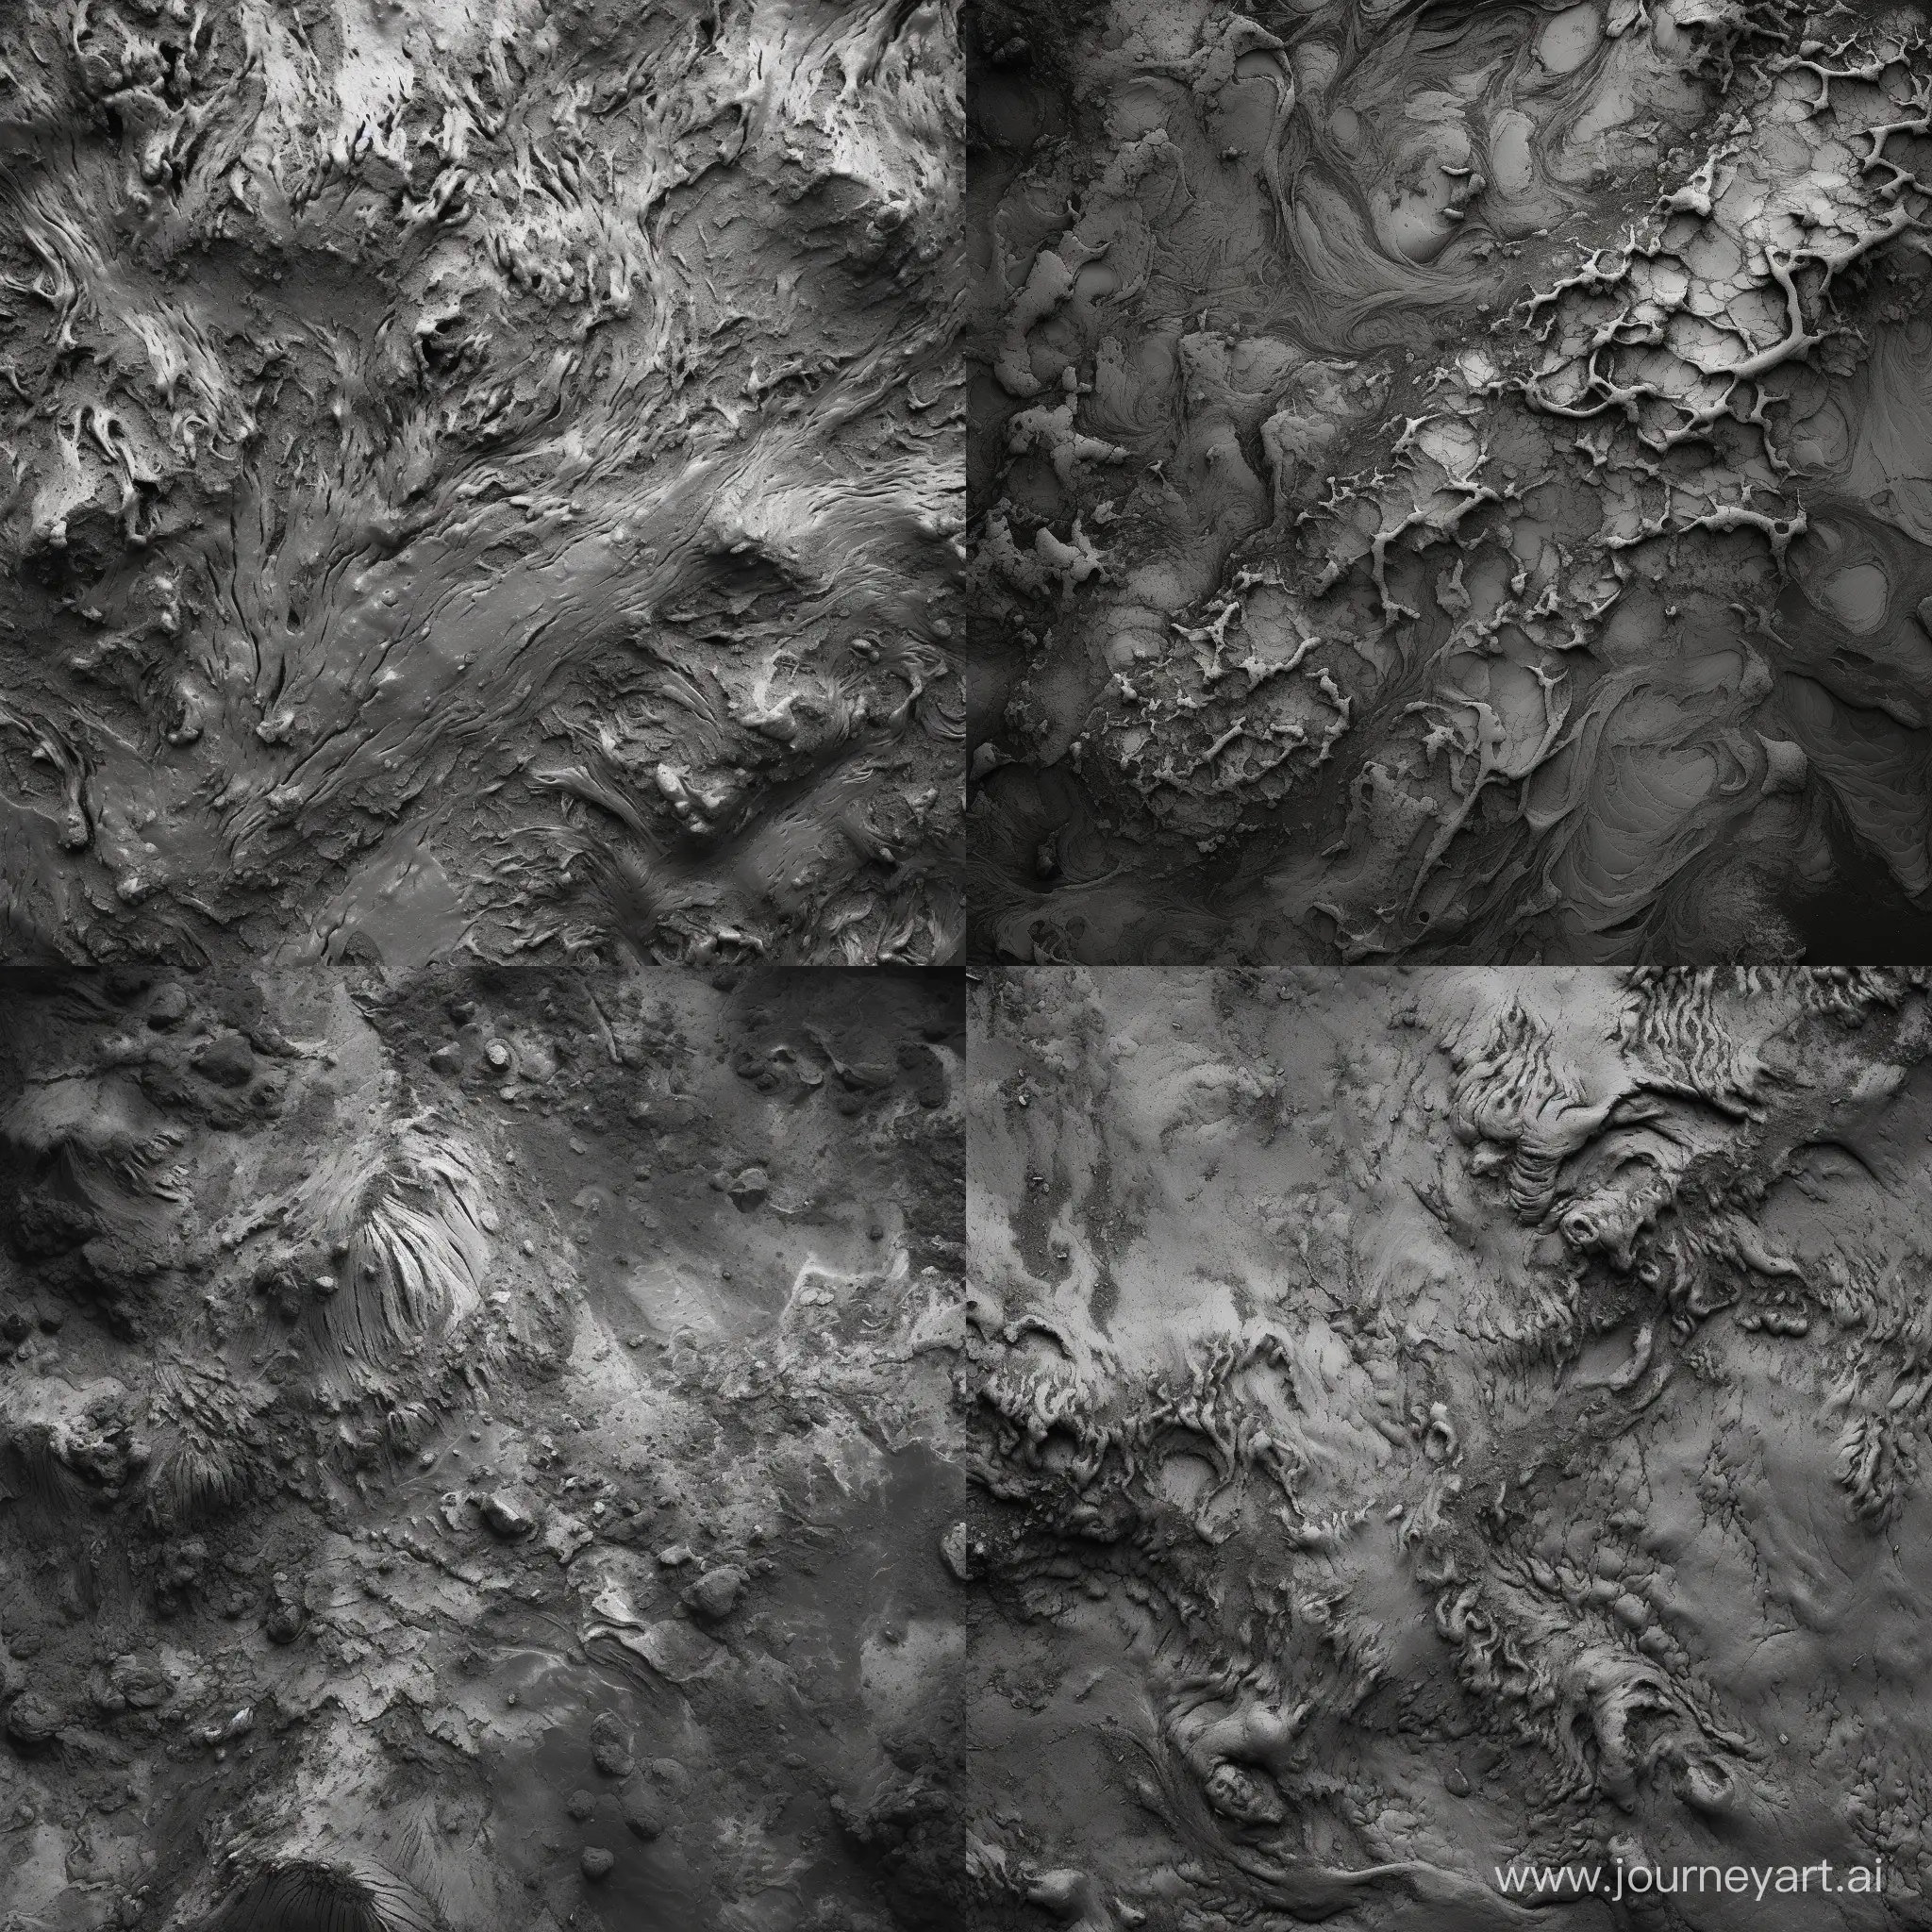 TopView-Realistic-Mud-Texture-in-Striking-Black-and-White